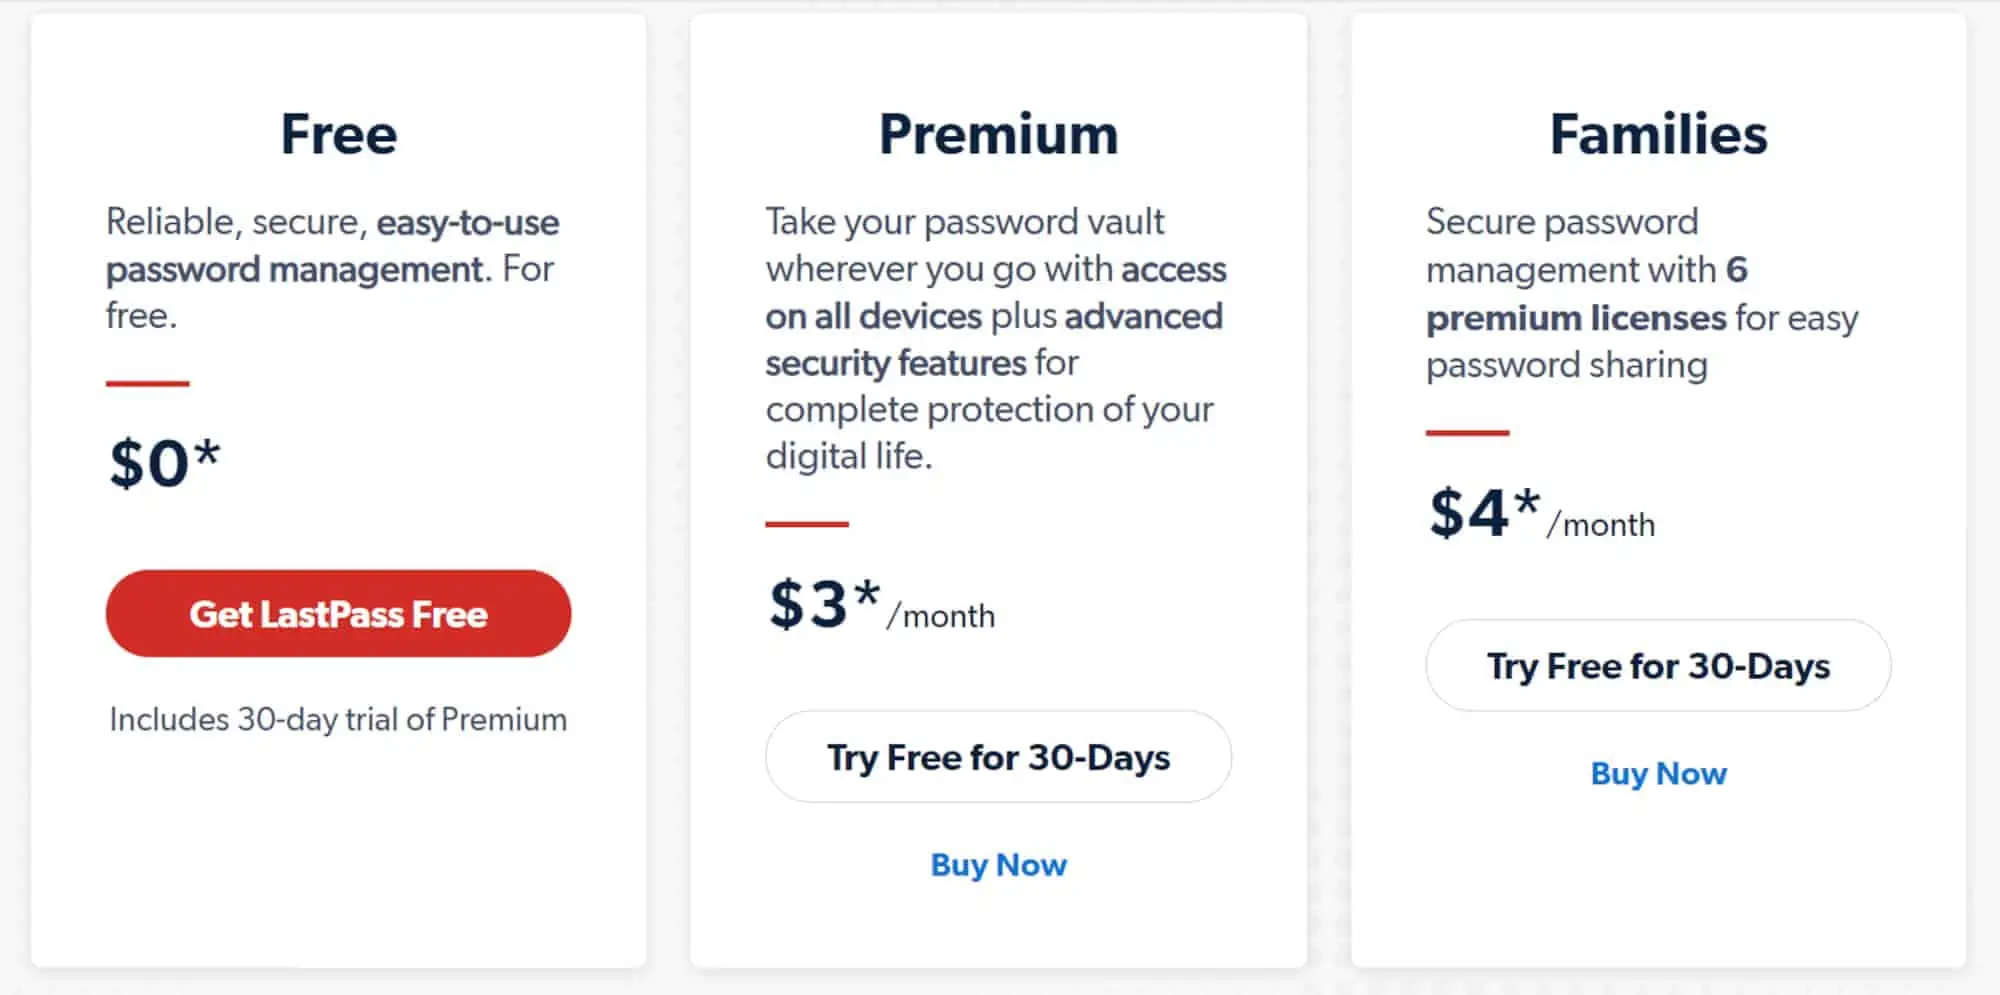 LastPass pricing, LastPass free features, LastPass Premium price and features and LastPass Families price and features